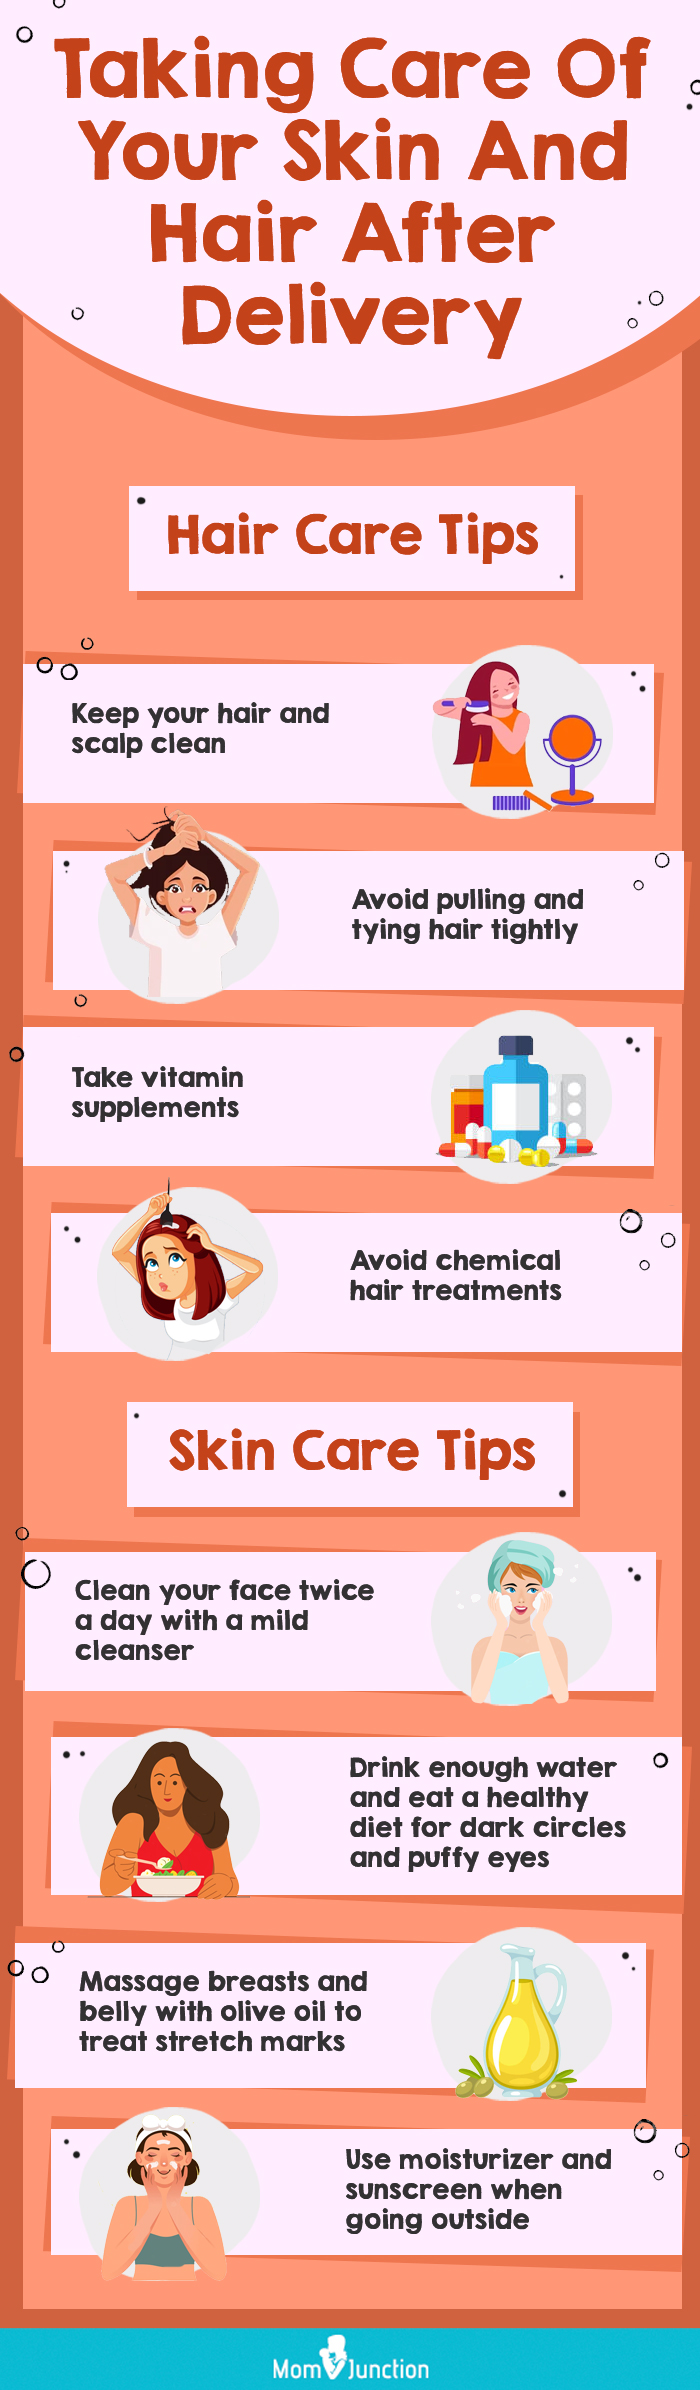 taking care of your skin and hair after delivery [infographic]